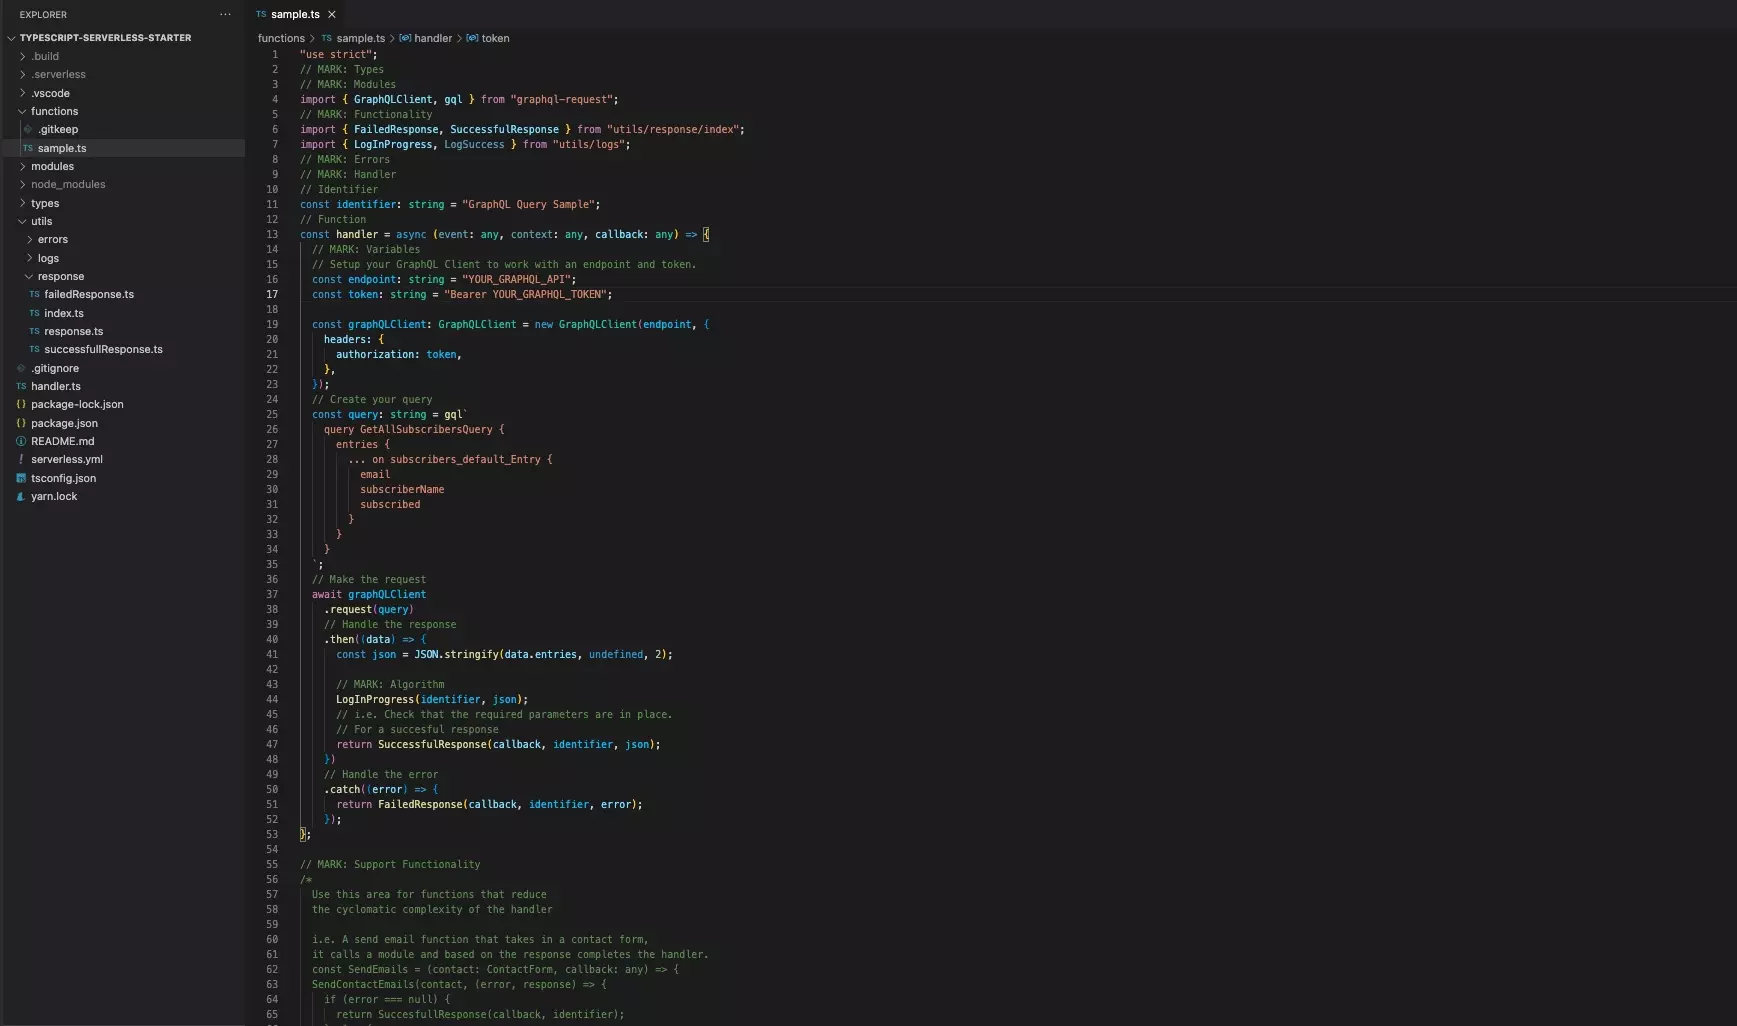 A screenshot of VSCode with the complete code. It has been provided at the end of this how to step with directions.